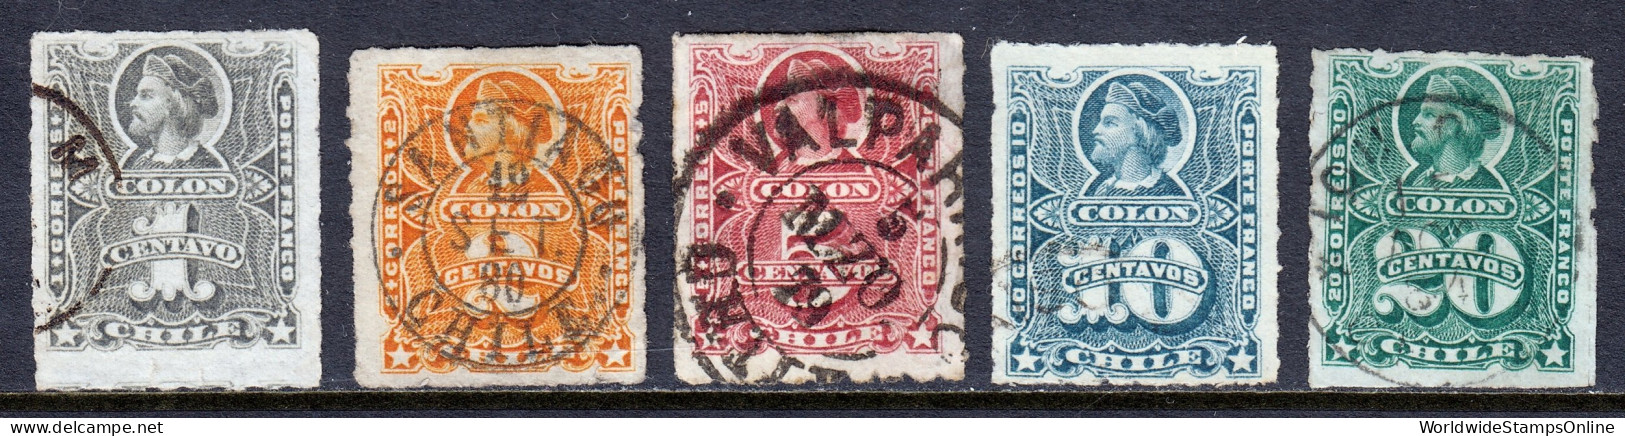 Chile - Scott #20-24 - Used - A Few Are Heavily Hinged - SCV $15 - Chile